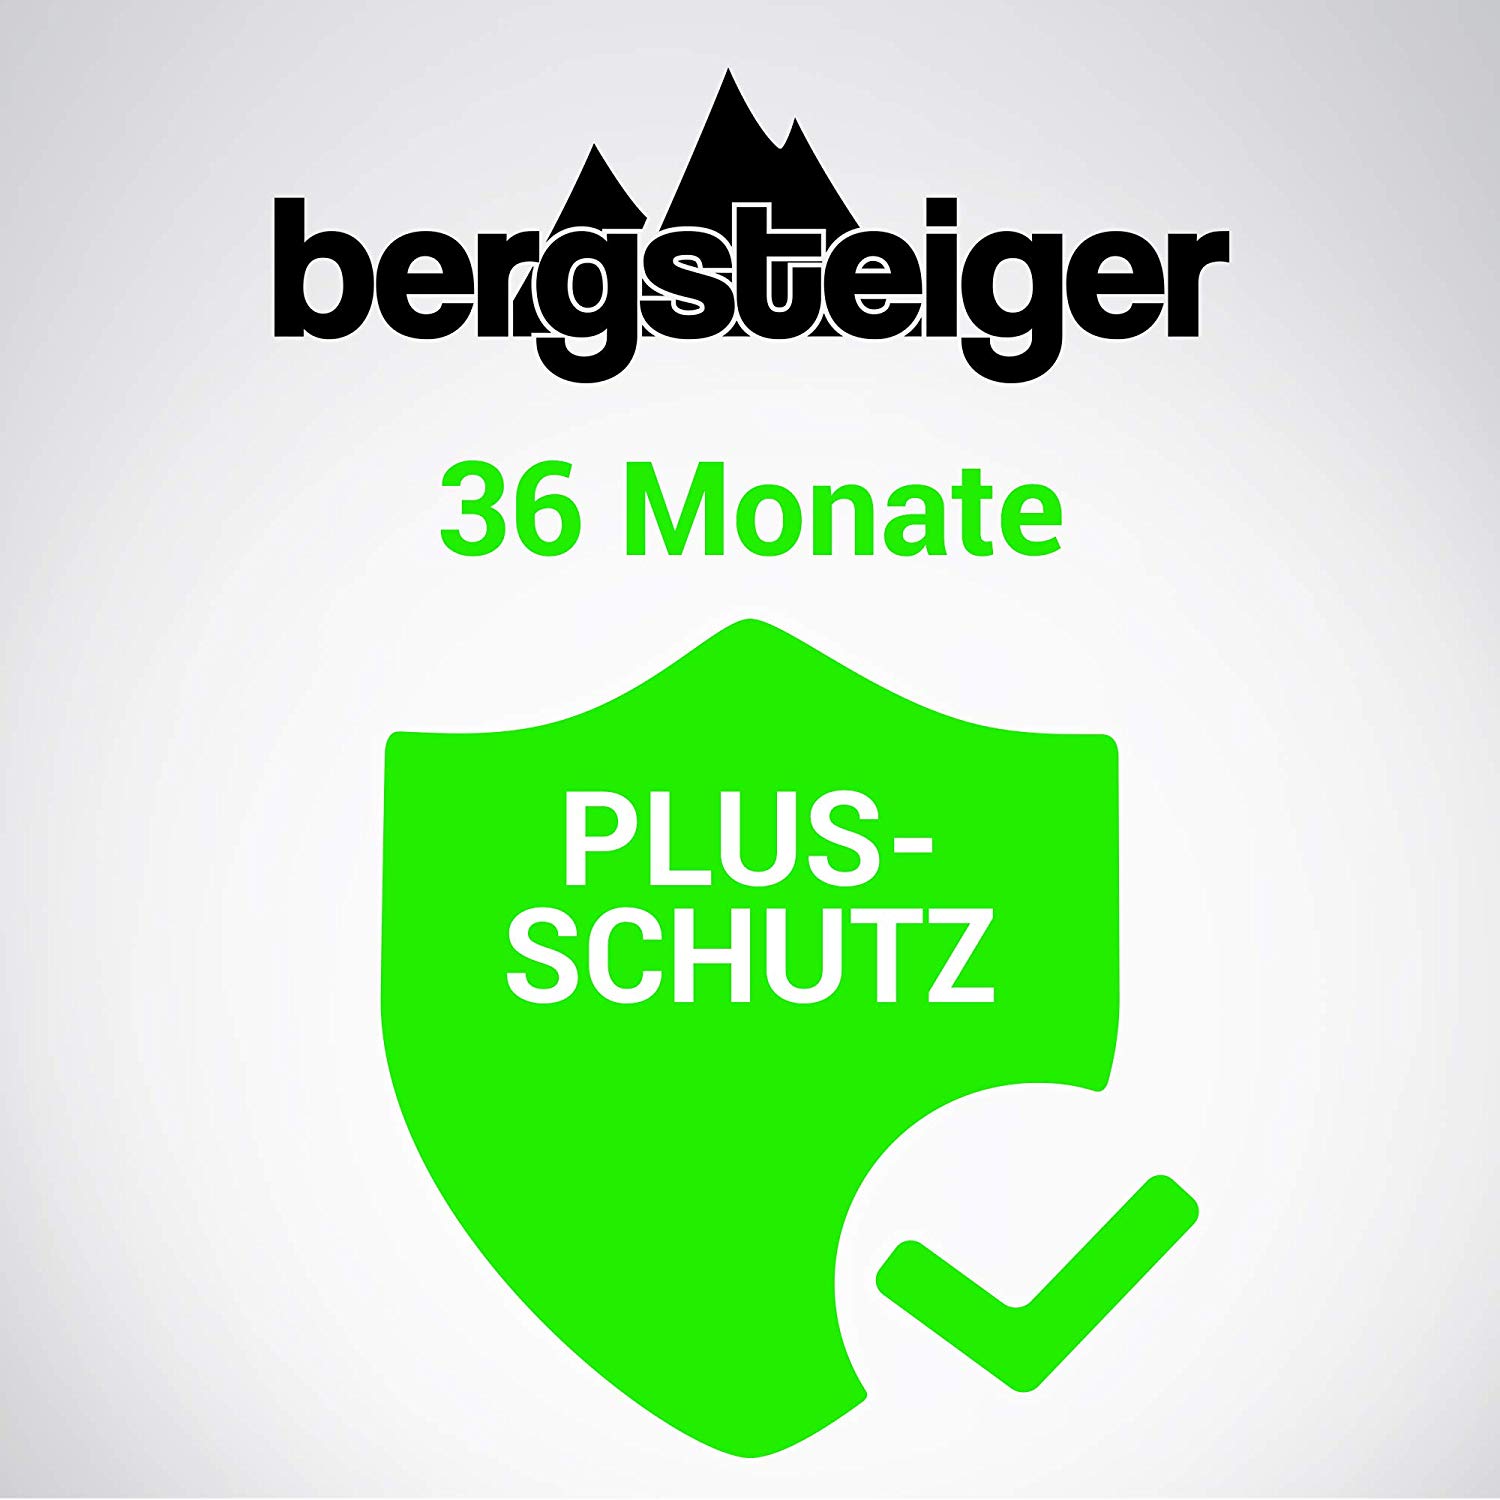 Bergsteiger pushchair protection, plus protection and mobility guarantee (only valid for Bergsteiger pram), warranty extension, mountaineering stroller accessories